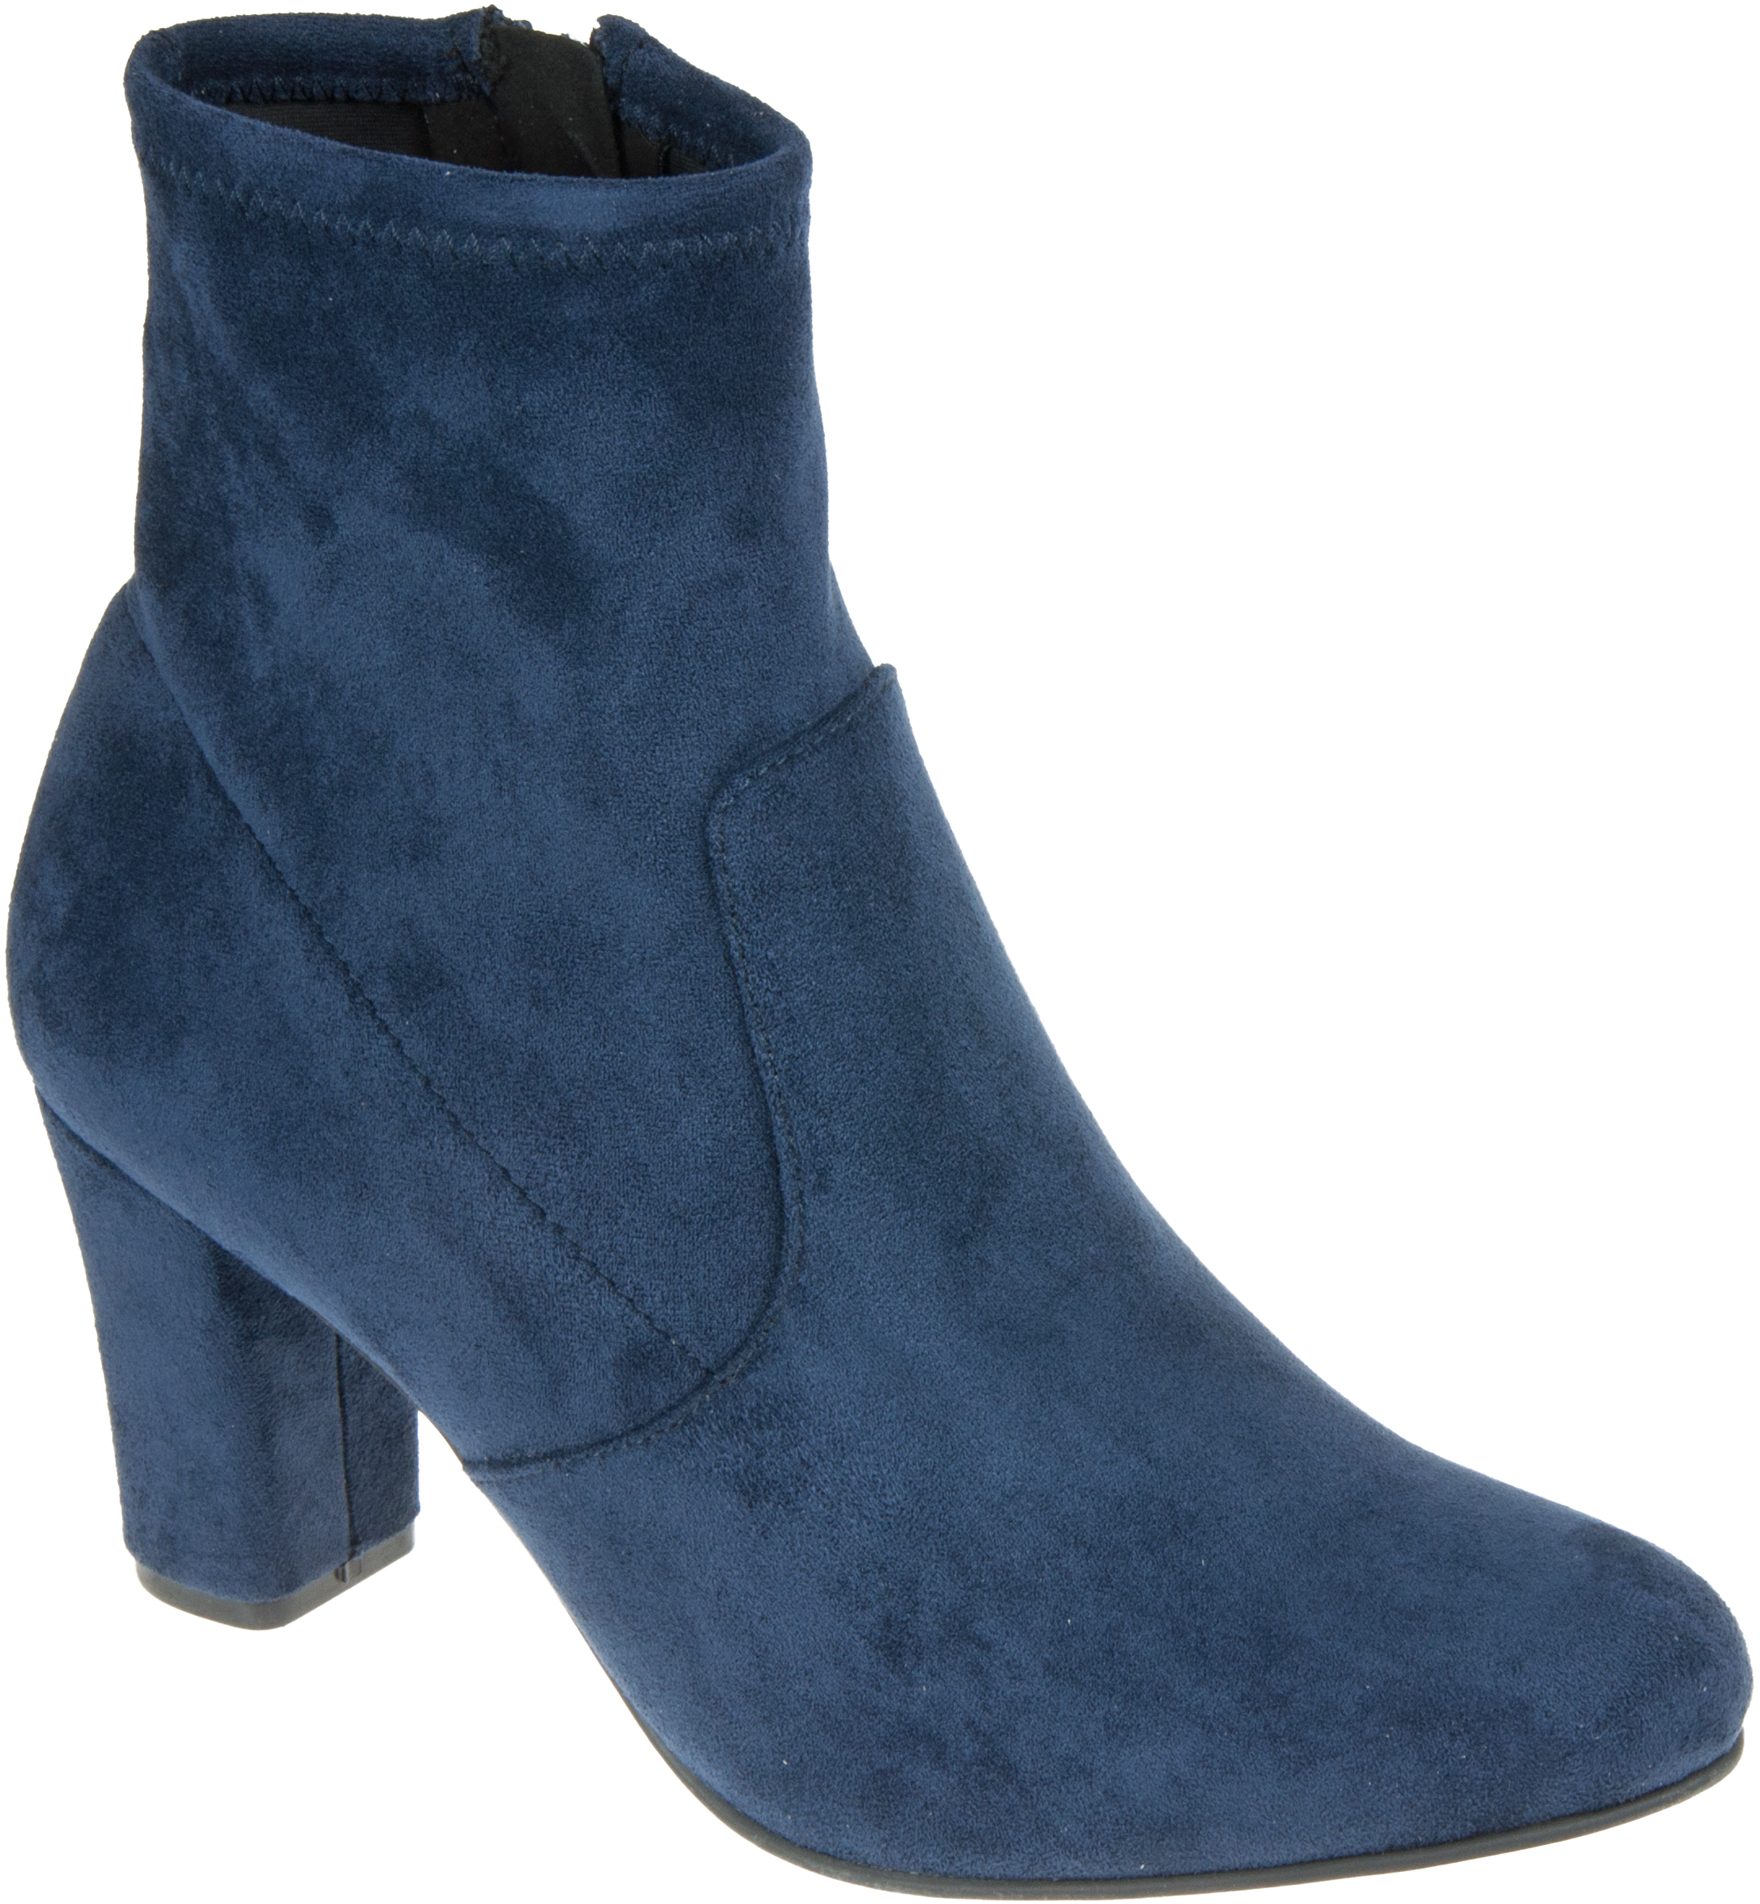 Caprice Britt 23 Ocean Stretch 25300-23 870 - Ankle Boots - Humphries Shoes